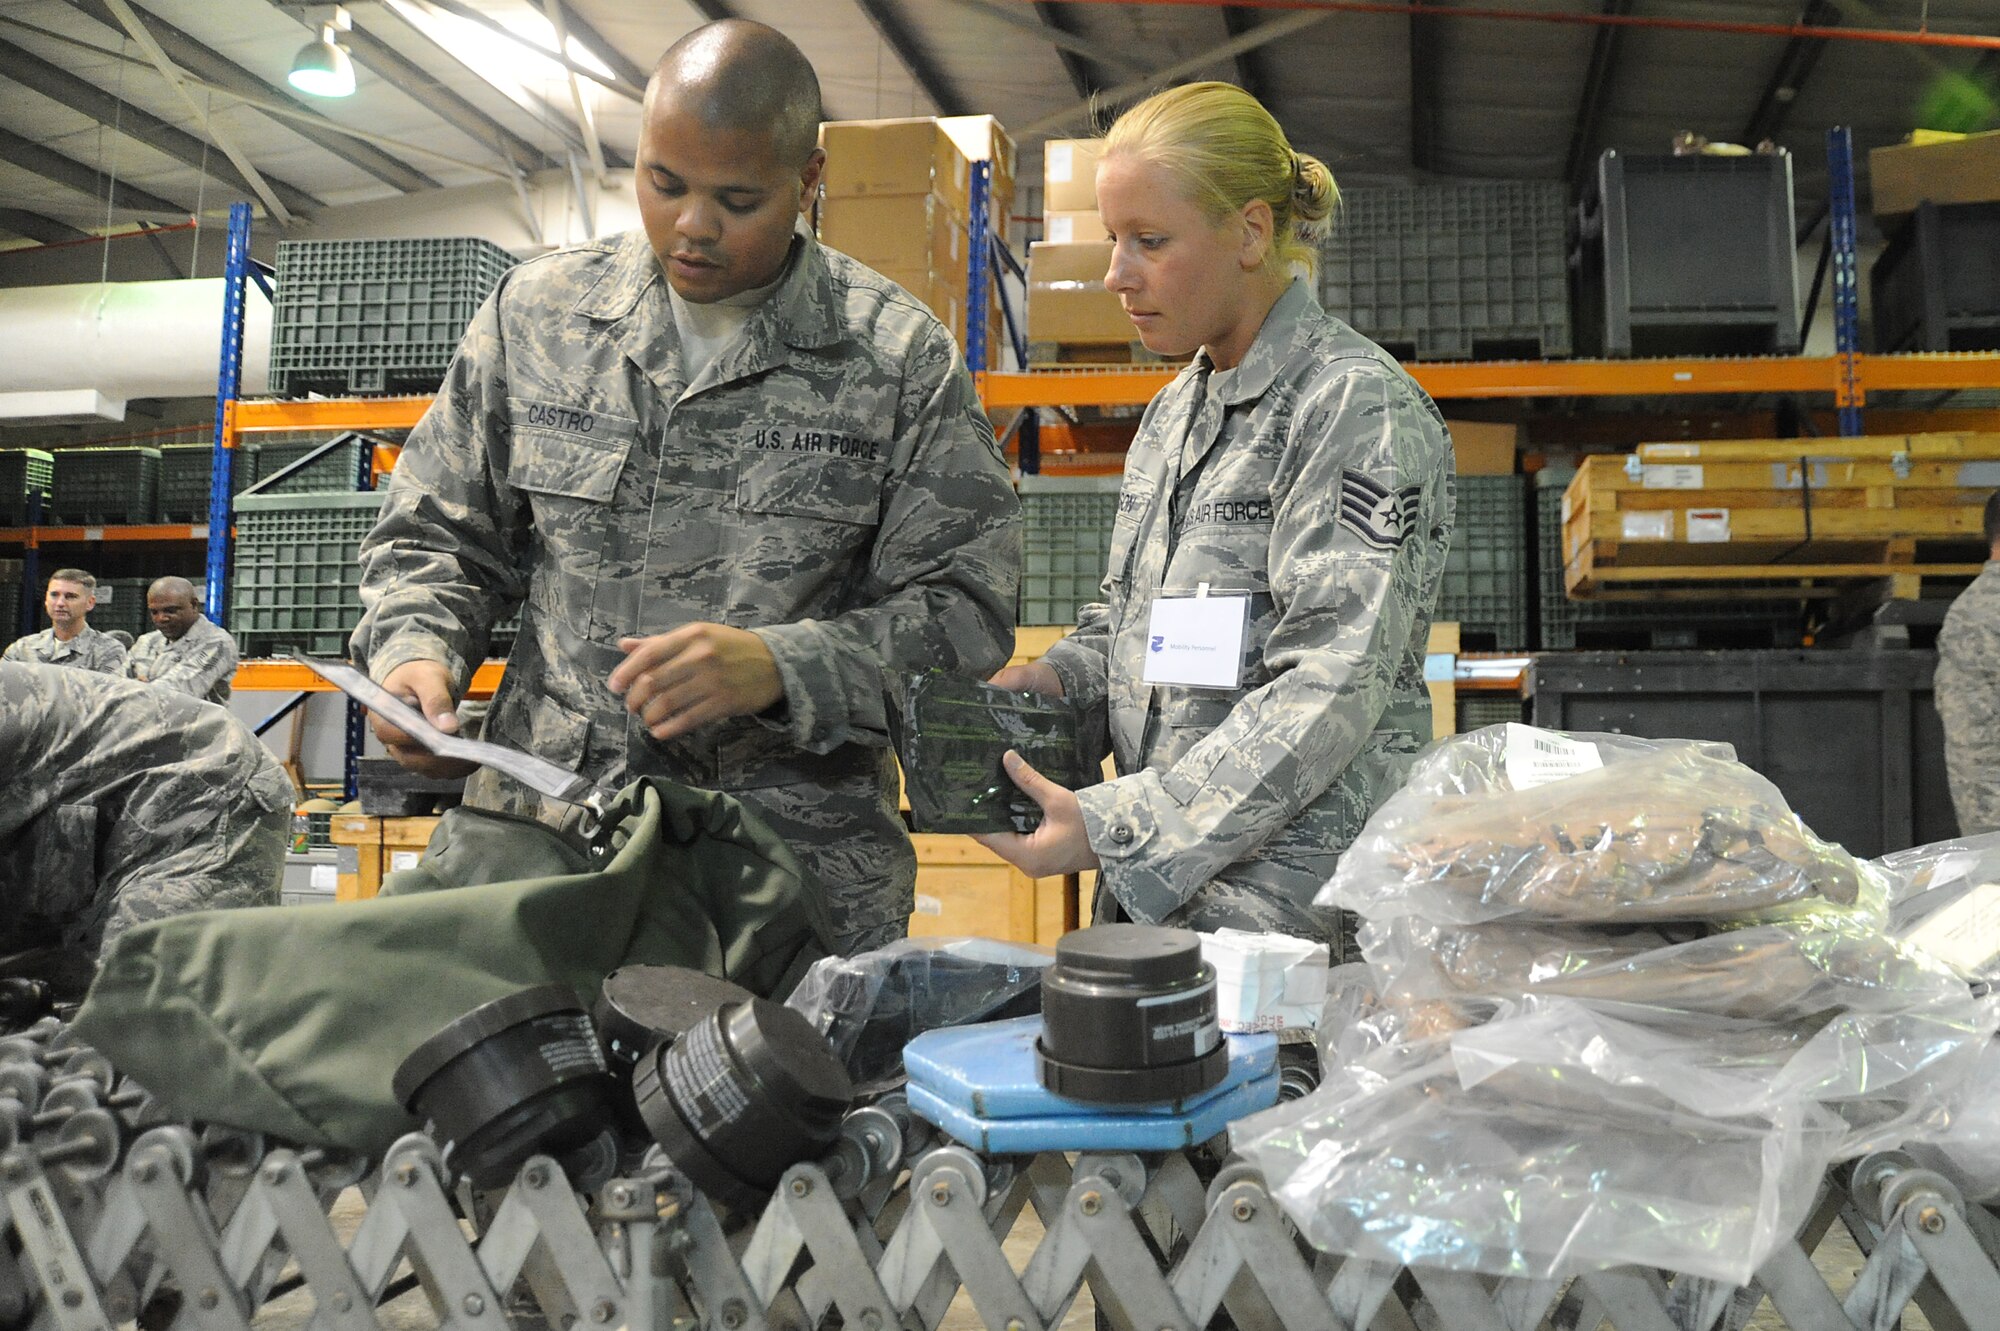 Staff Sgt. Angela Dawson, 380th Expeditionary Logistics Readiness Squadron, assists Airman 1st Class Eric Castro, 380th ELRS, inventory the contents of his C-bag during a readiness exercise, April 21 at undisclosed location in Southwest Asia. The 380th ELRS ran the exercise to test the timeliness and capability for redeployment of Airmen. Sergeant Dawson is deployed from Eglin AFB, Fla. and hails from Tallahassee, Fla. Airman Castro is deployed from Eglin AFB, Fla. and is from Rochester, N.Y. (U.S. Air Force photo by Senior Airman Brian J. Ellis) (Released)